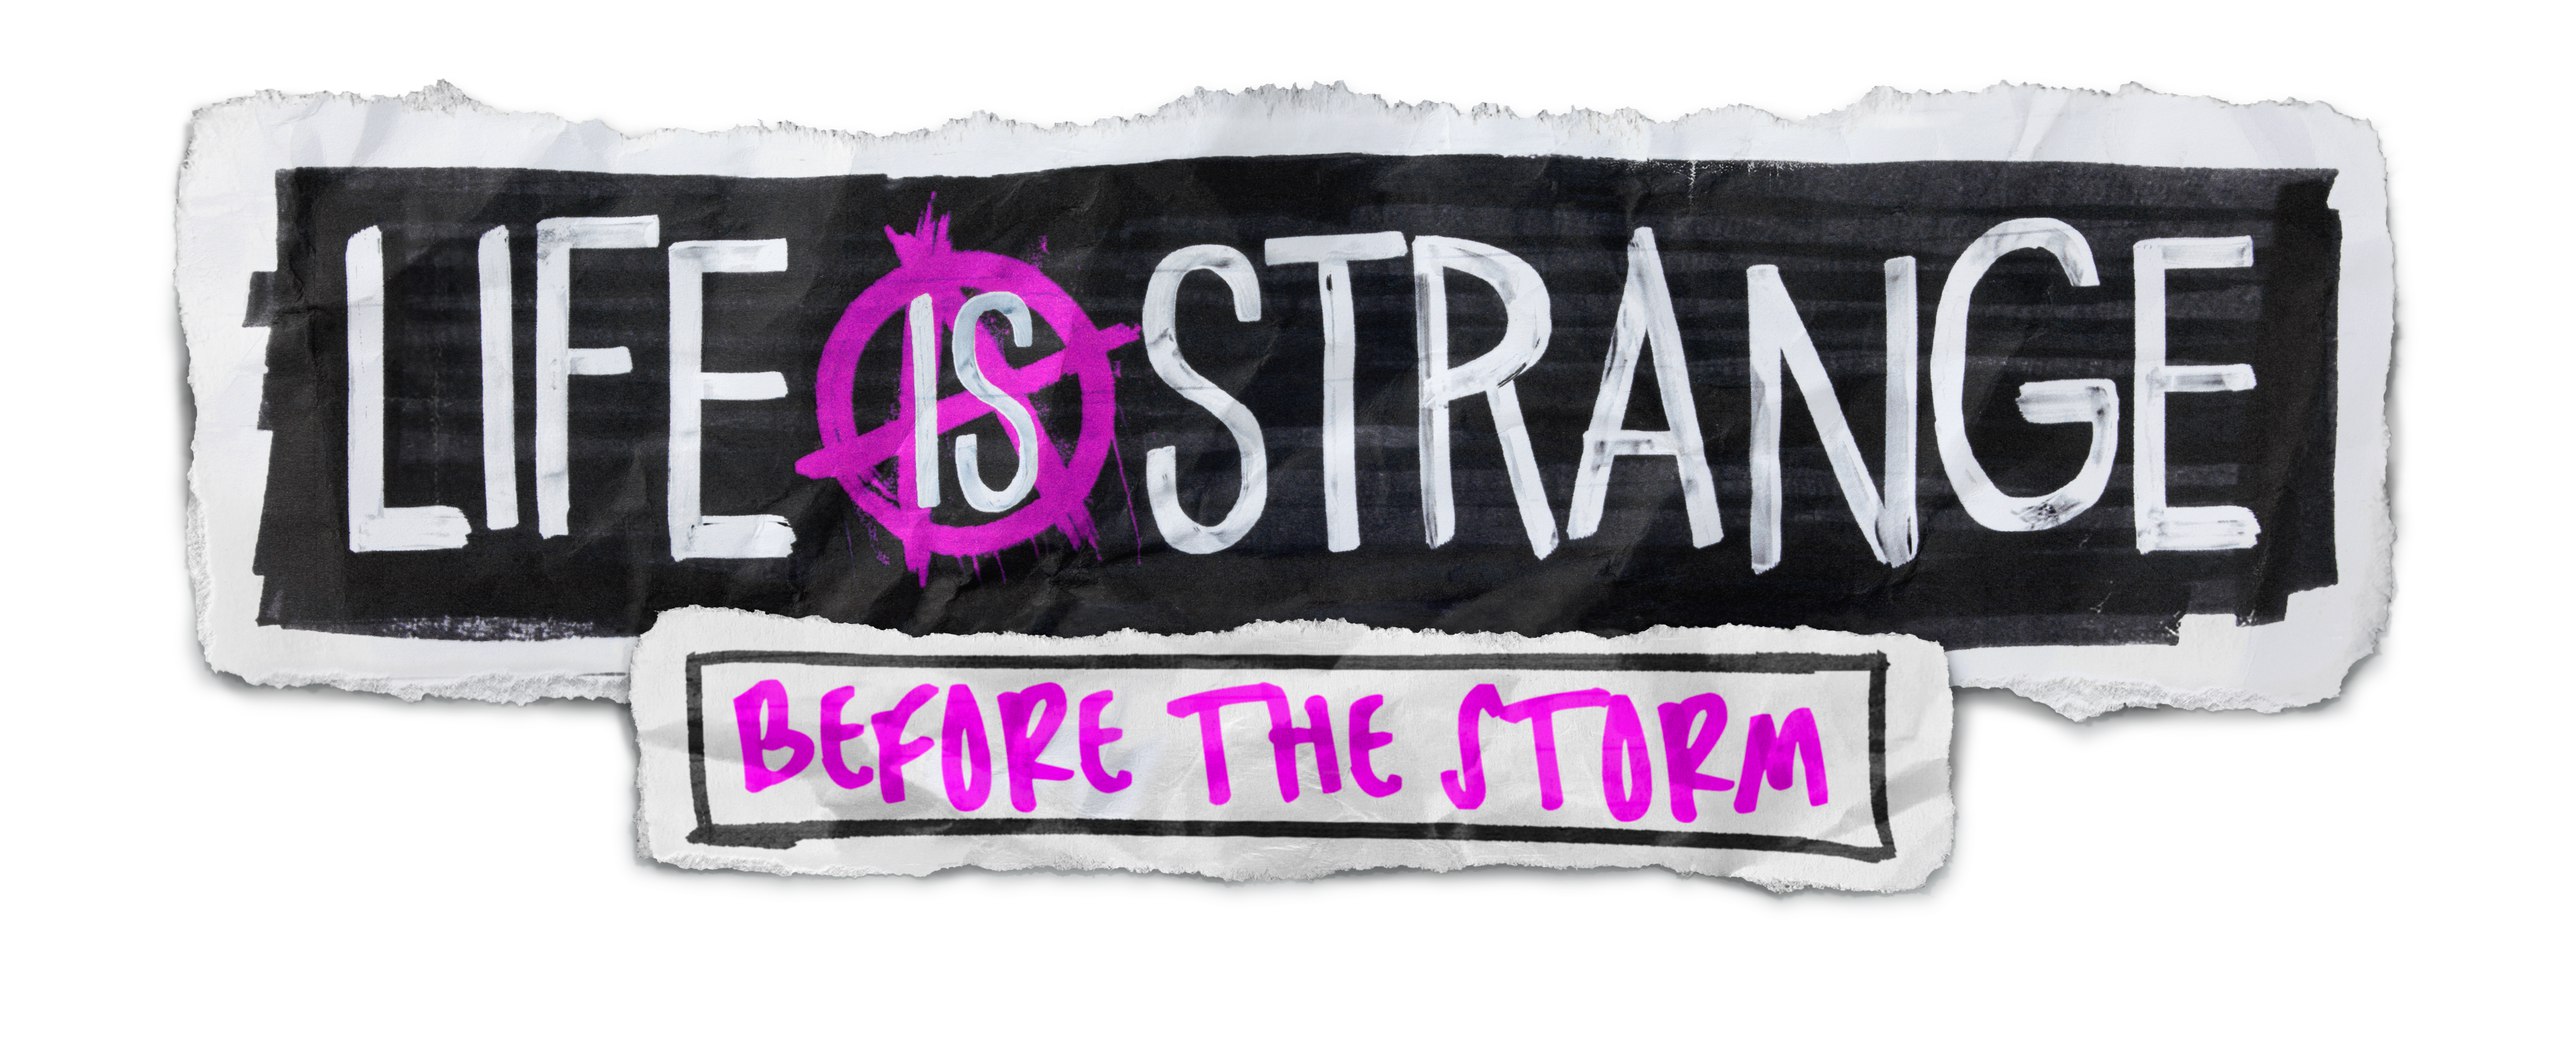 Life is a lie. Life is Strange before the Storm logo. Life is Strange before the Storm надпись. Лайф ИС Стрендж before the Storm логотип. Life is Strange логотип игры.